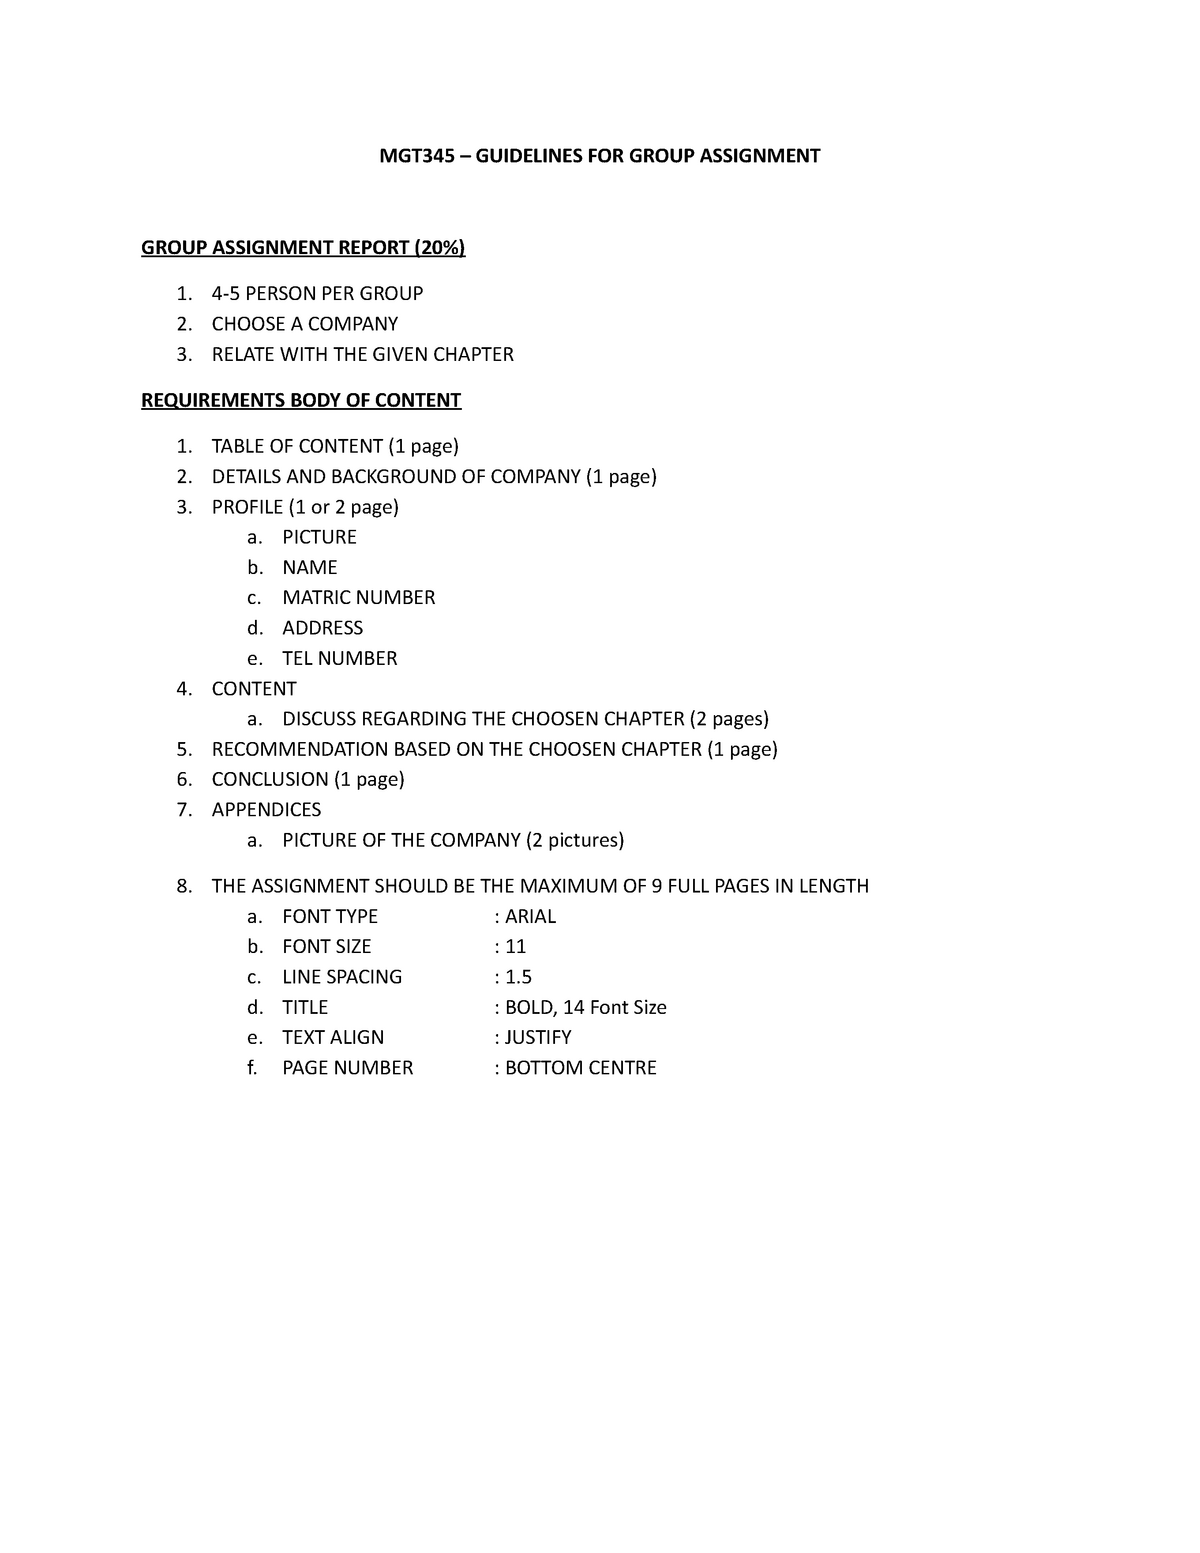 mgt345 group assignment report